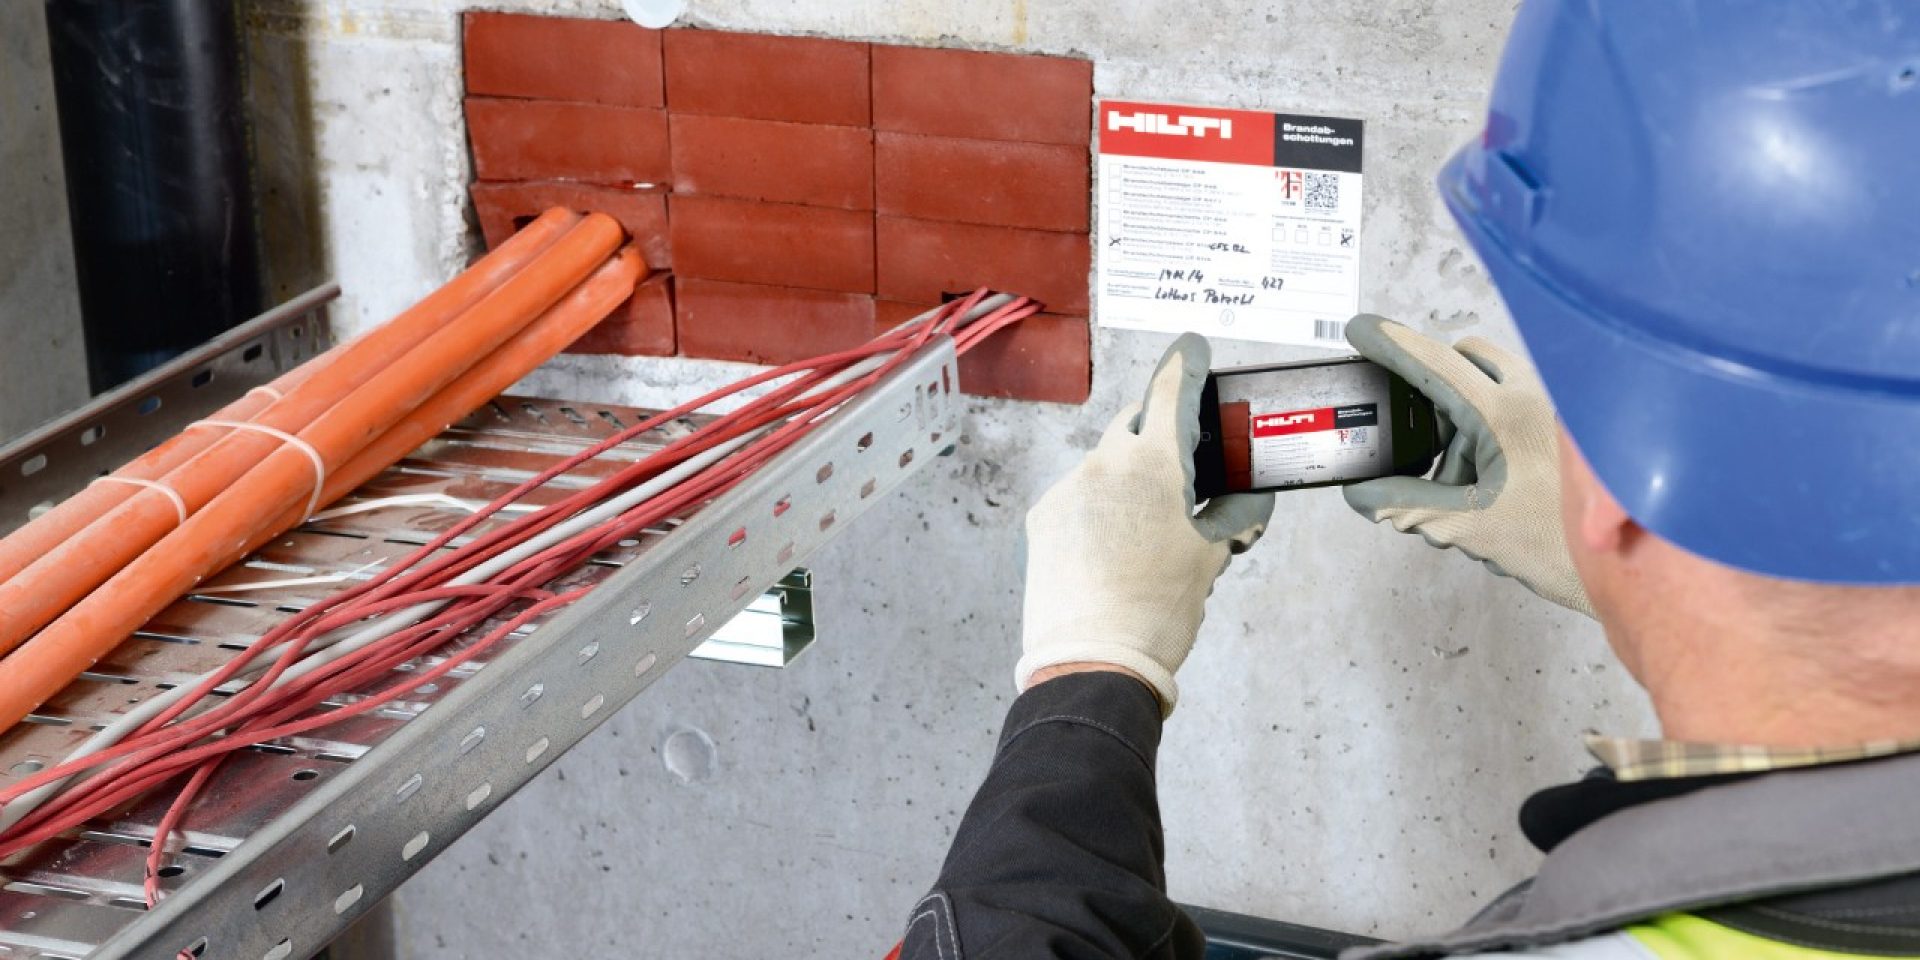 Hilti fire protection software